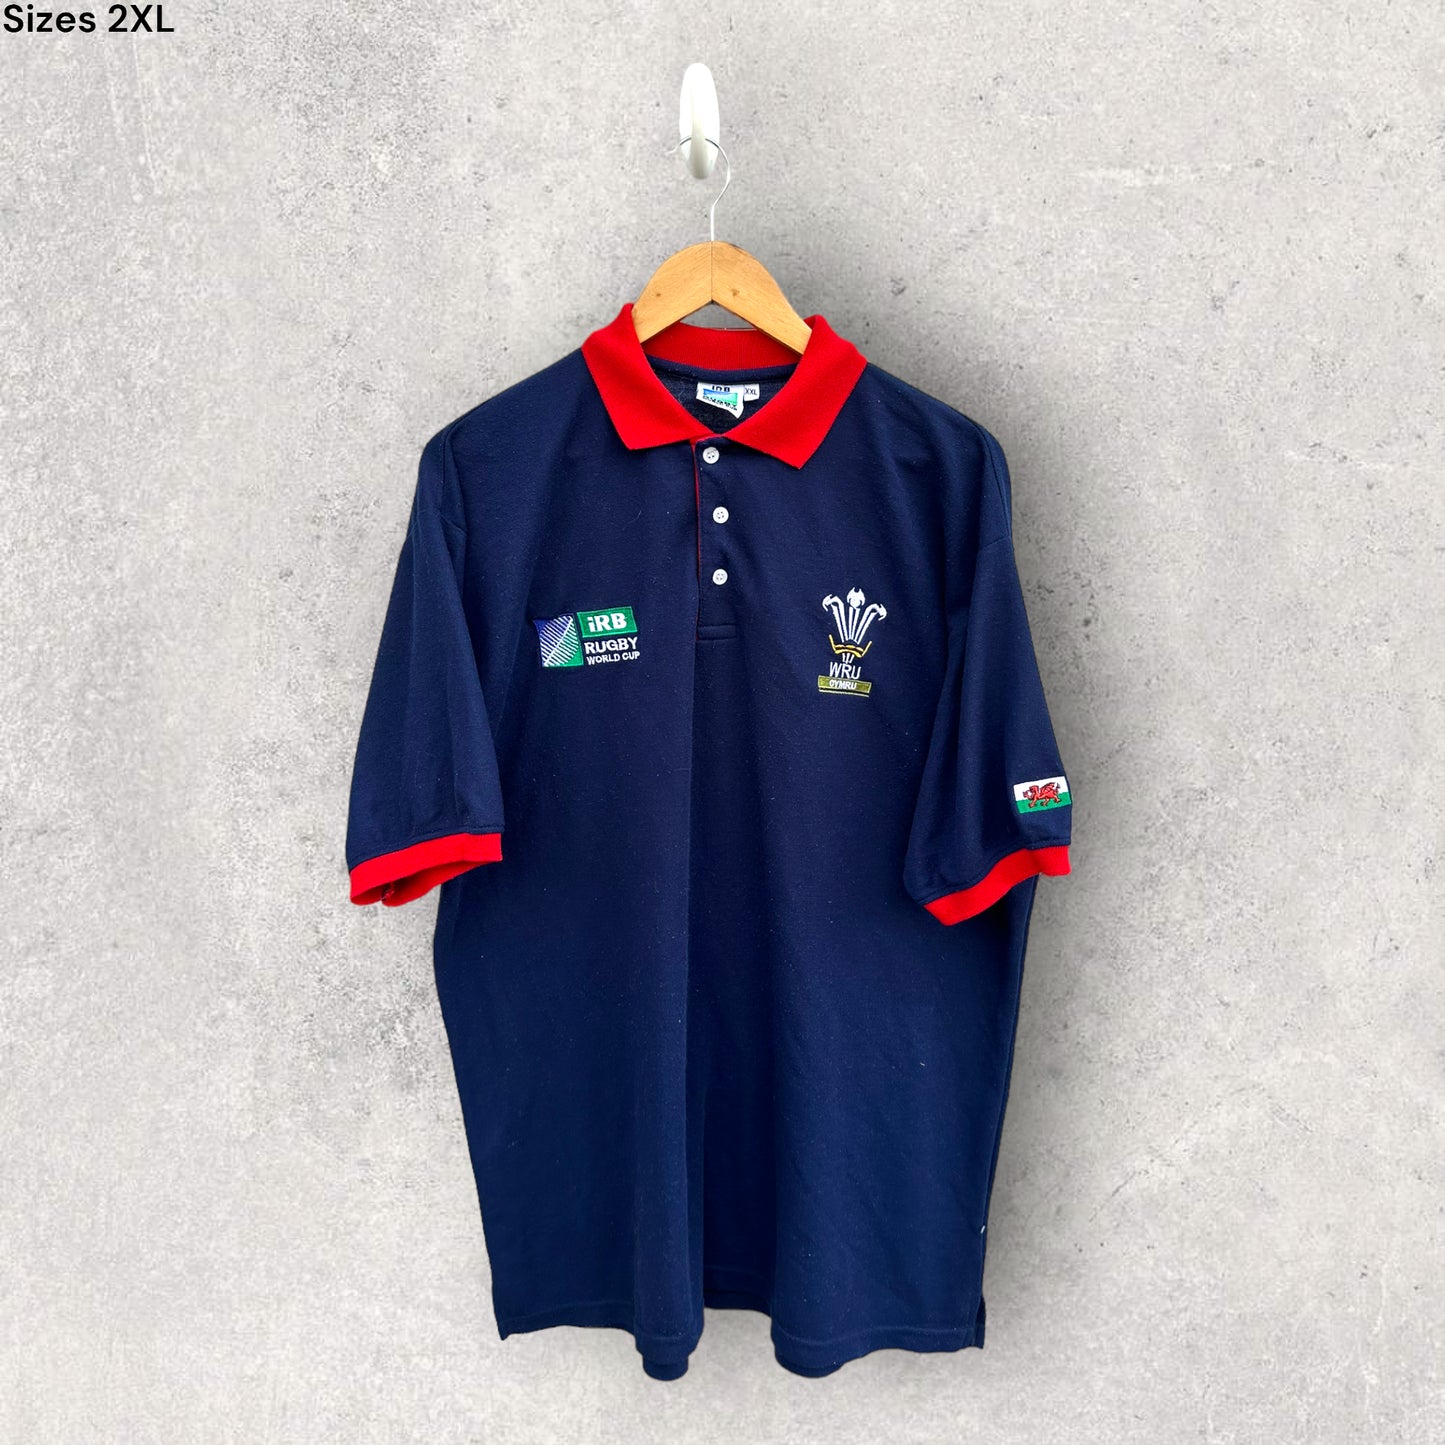 WALES RUGBY UNION WORLD CUP VINTAGE POLO SHIRT